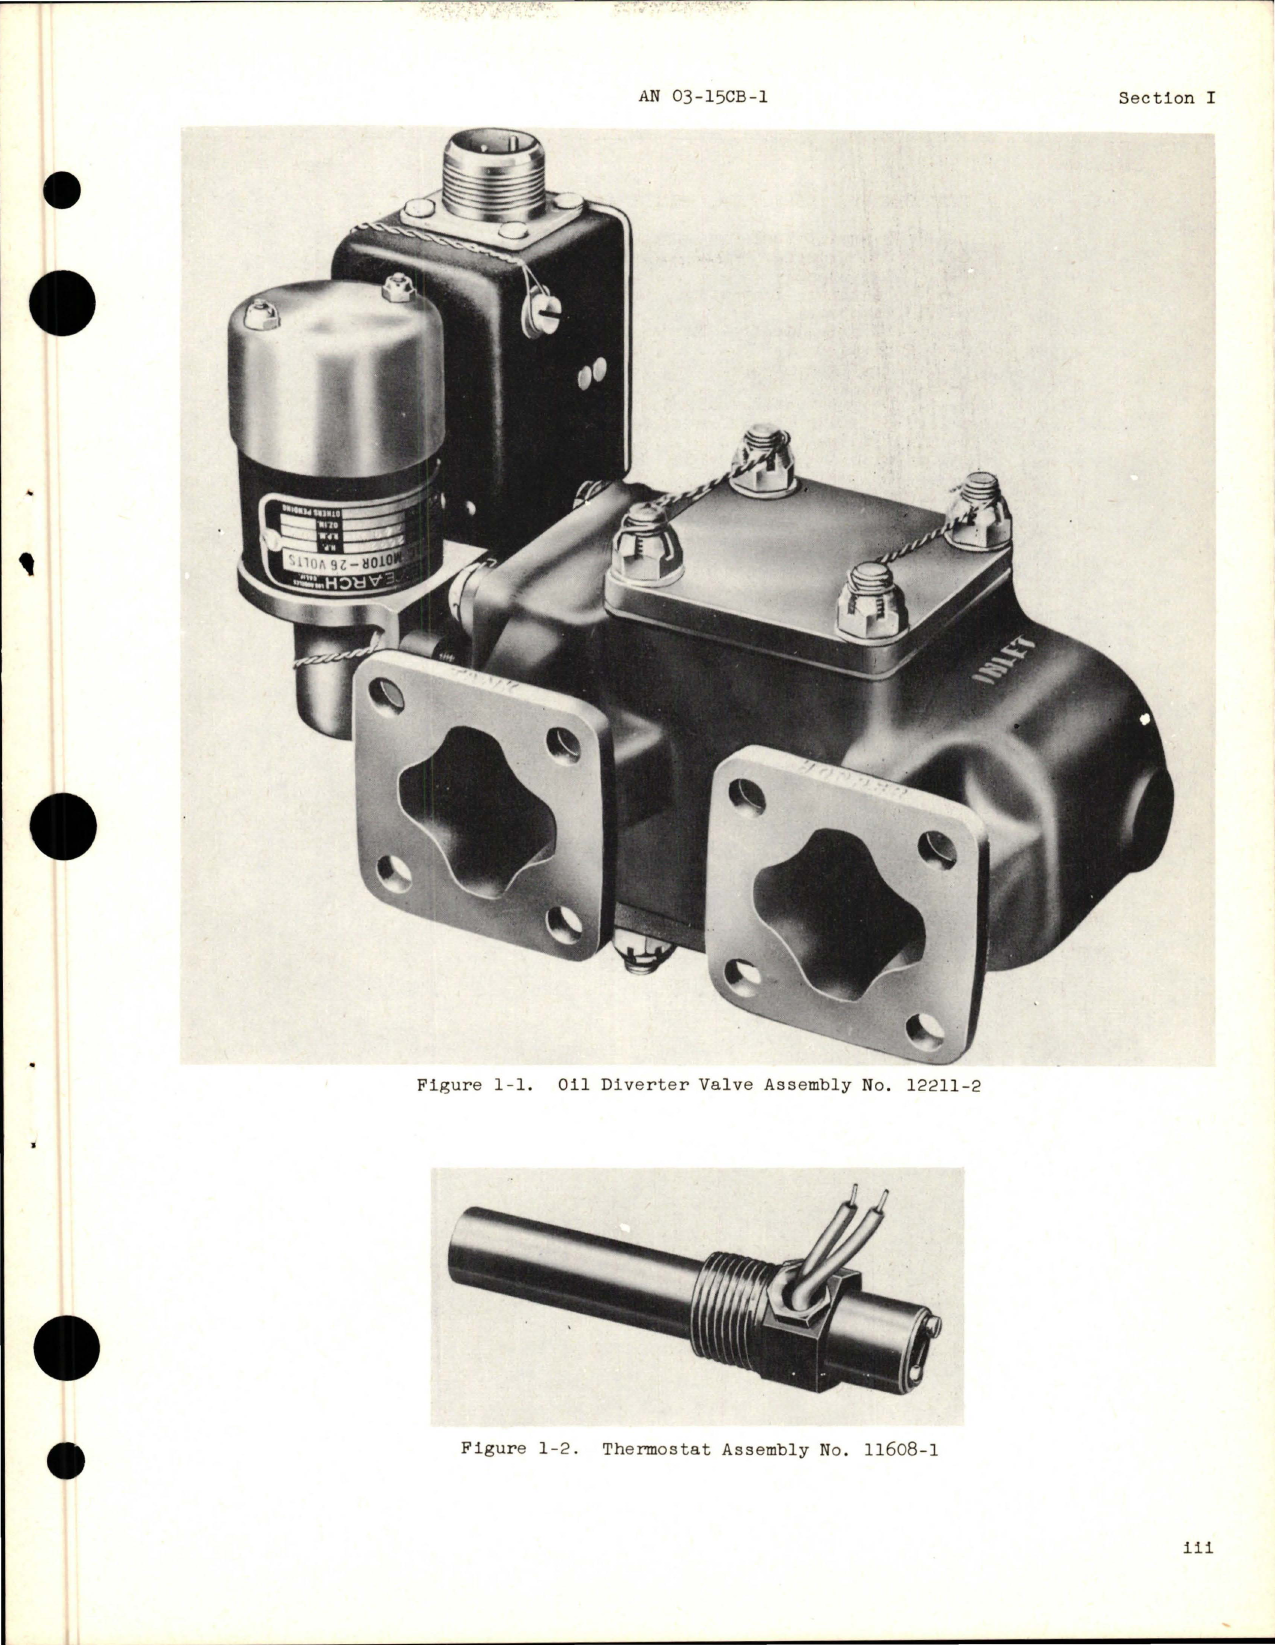 Sample page 5 from AirCorps Library document: Operation, Service, Overhaul Instructions for Oil Diverter Valve Assembly - Part 12211-2, 12252-2, Floating Control Thermostat Assembly - Part 11607, Thermostat Assembly - Parts 11608-1, 11610-11